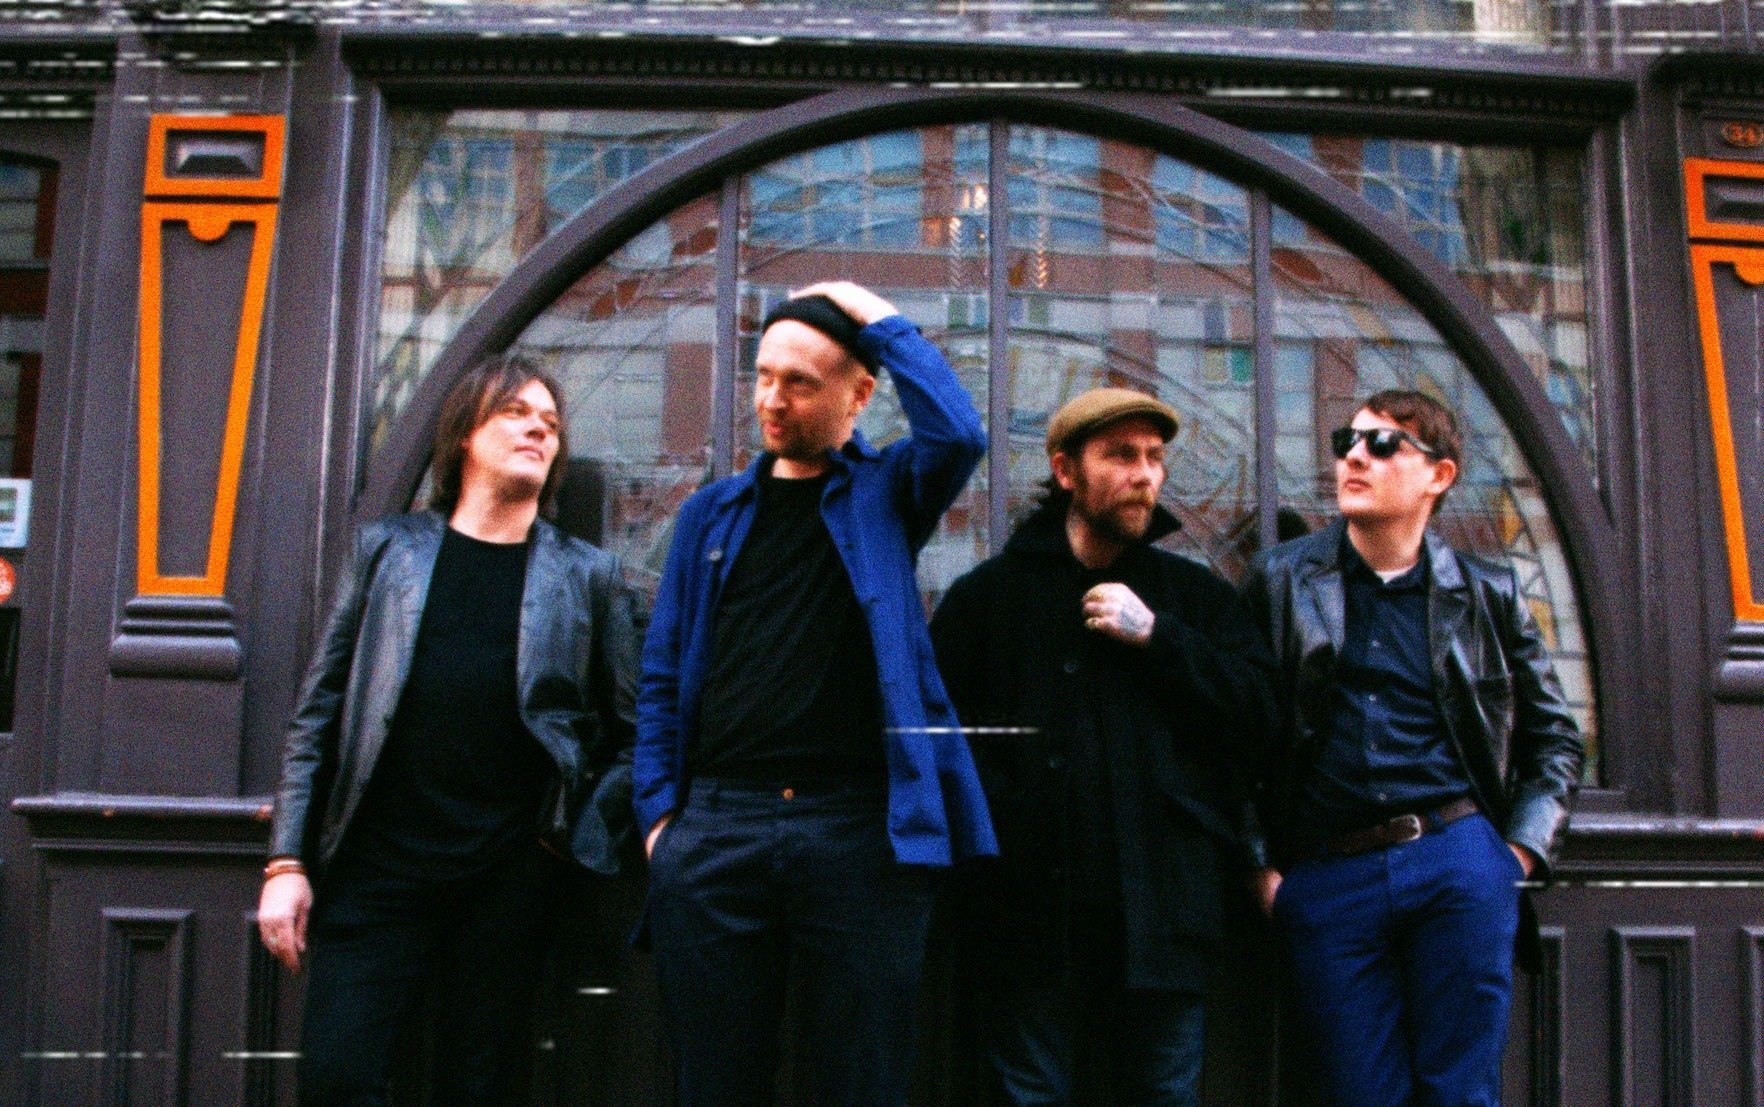 THE TWANG has announced the release of their brand new album, ‘If Confronted Just Go Mad' 1